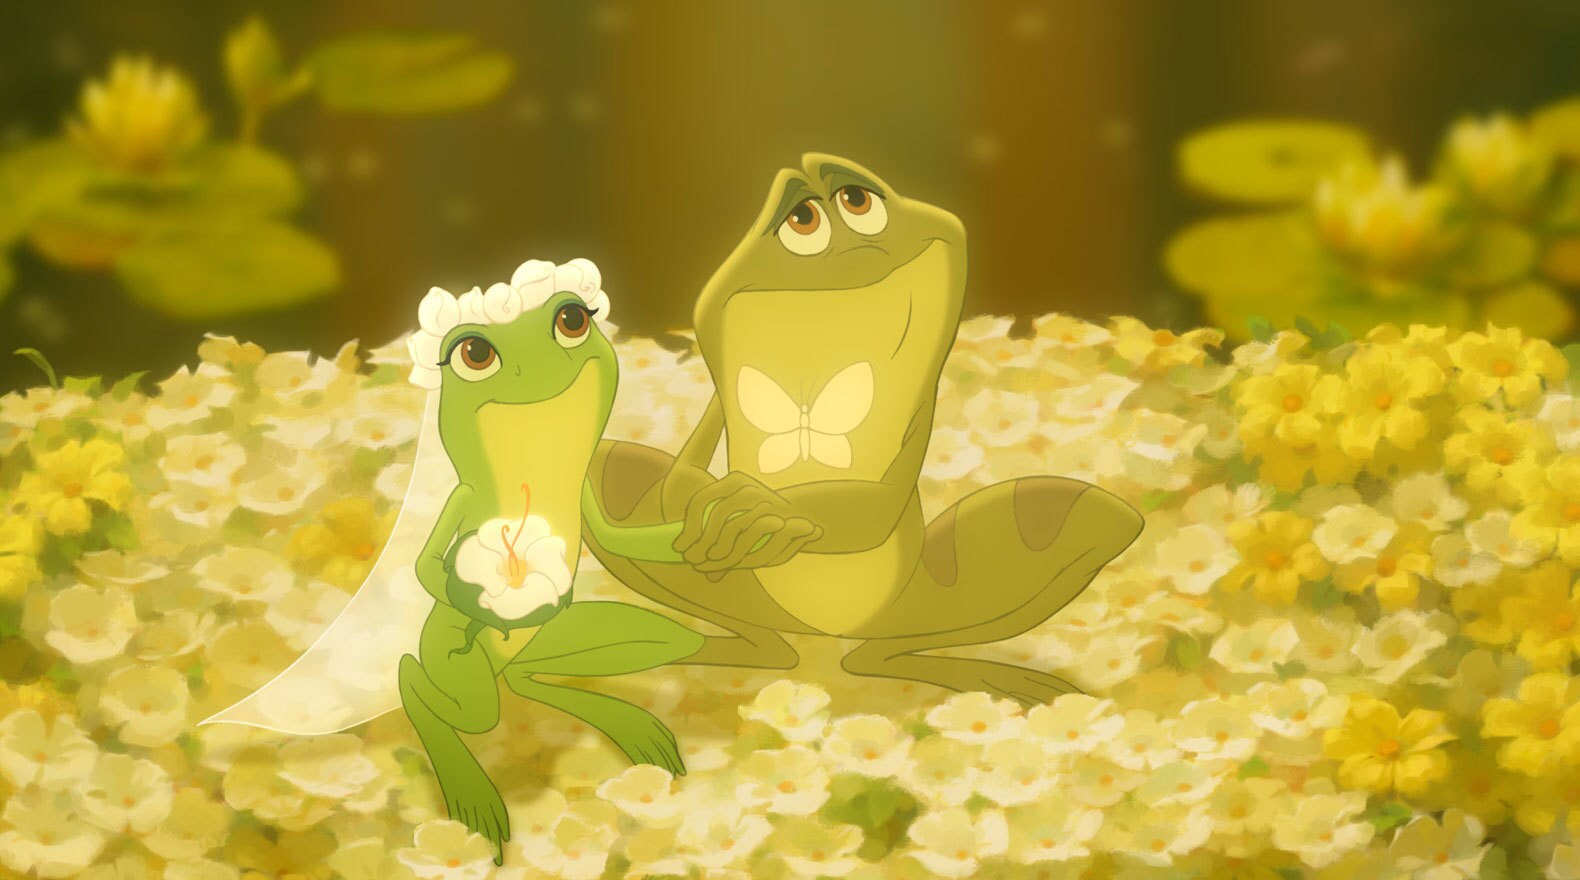 Tiana and Naveen as frogs getting married on a lily pad